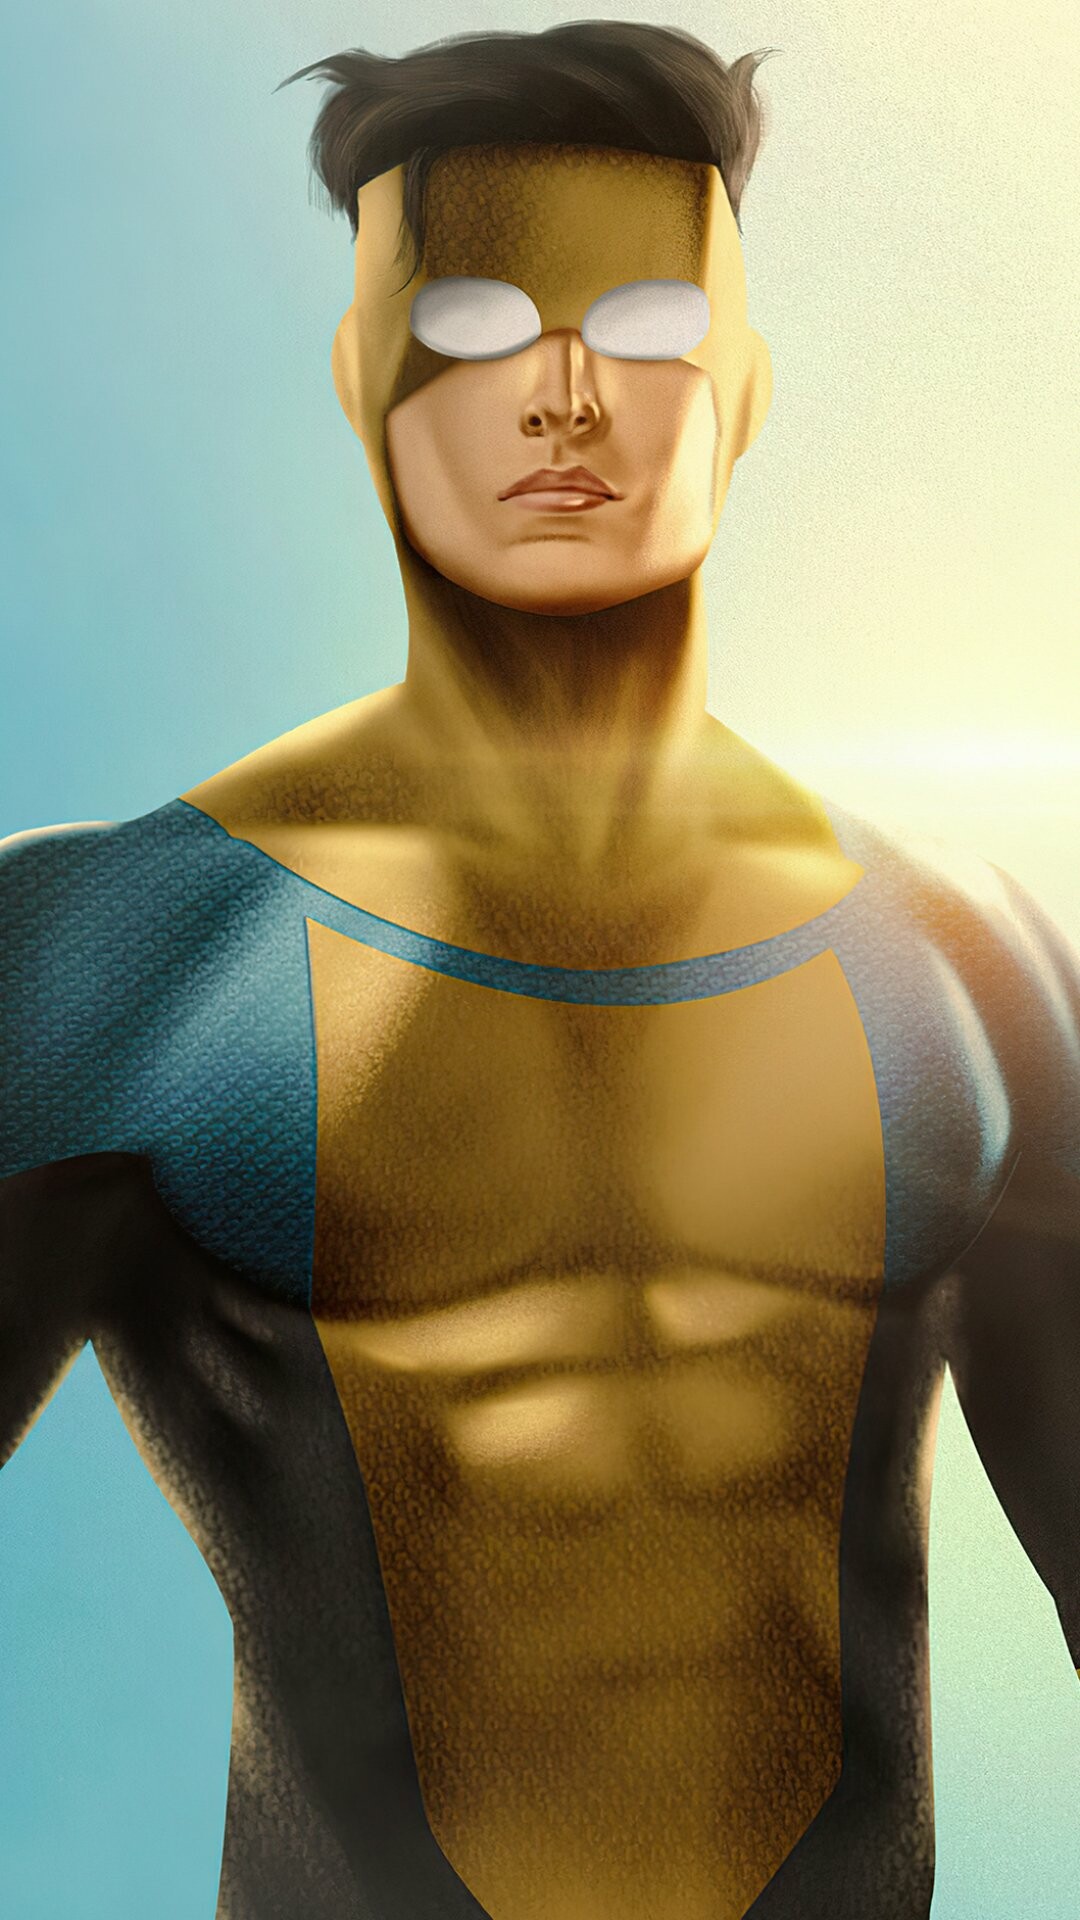 Invincible, Action-packed animation, Superhero origins, Battle for justice, 1080x1920 Full HD Handy